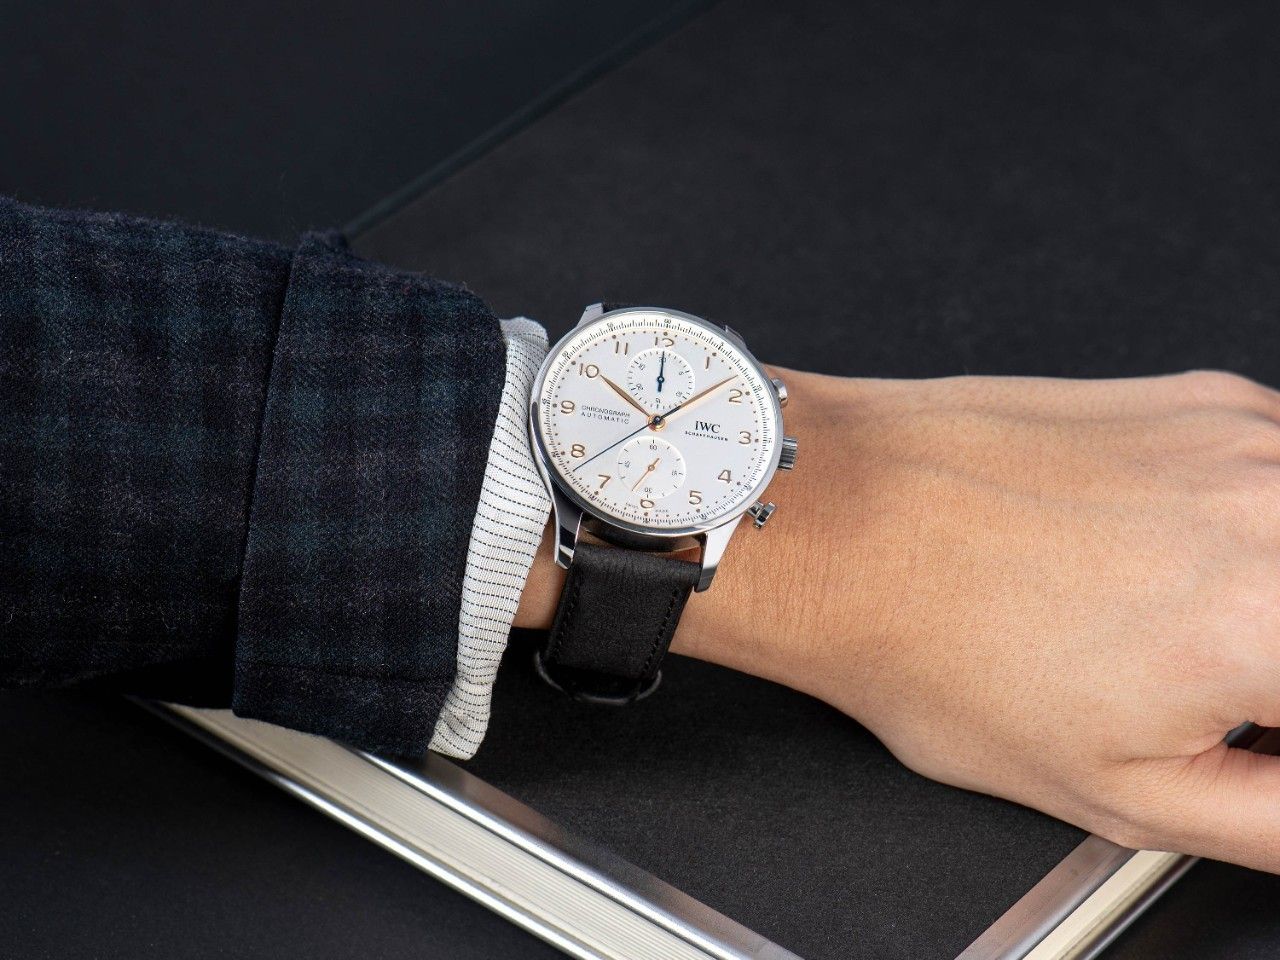 The Portugieser Chronograph (Ref. IW371604) feat. the new IWC TimberTex watch strap in black